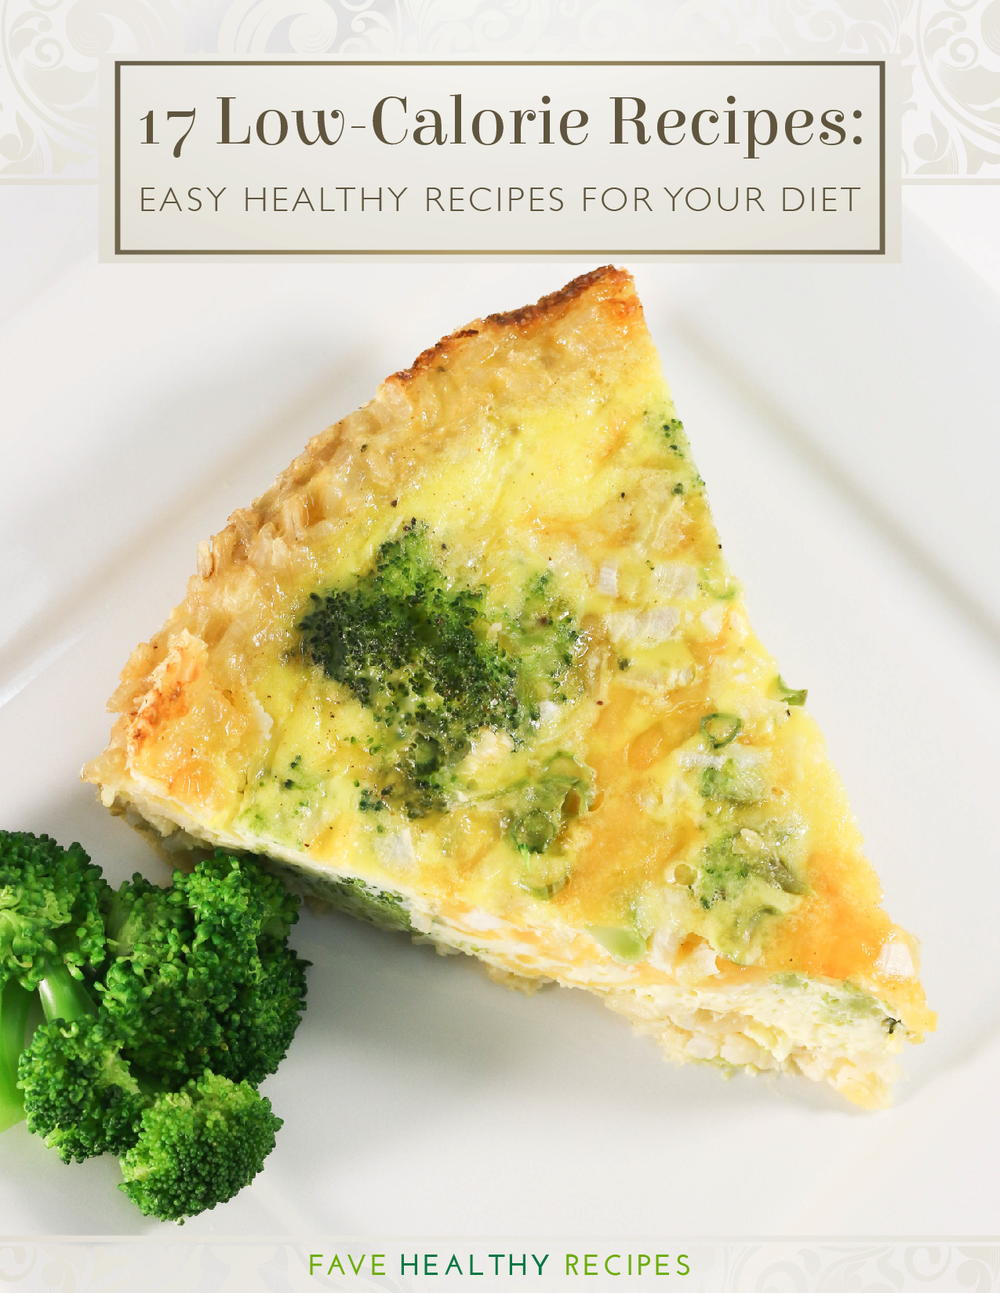 Low Calorie Diet Recipes
 17 Low Calorie Recipes Easy Healthy Recipes for Your Diet